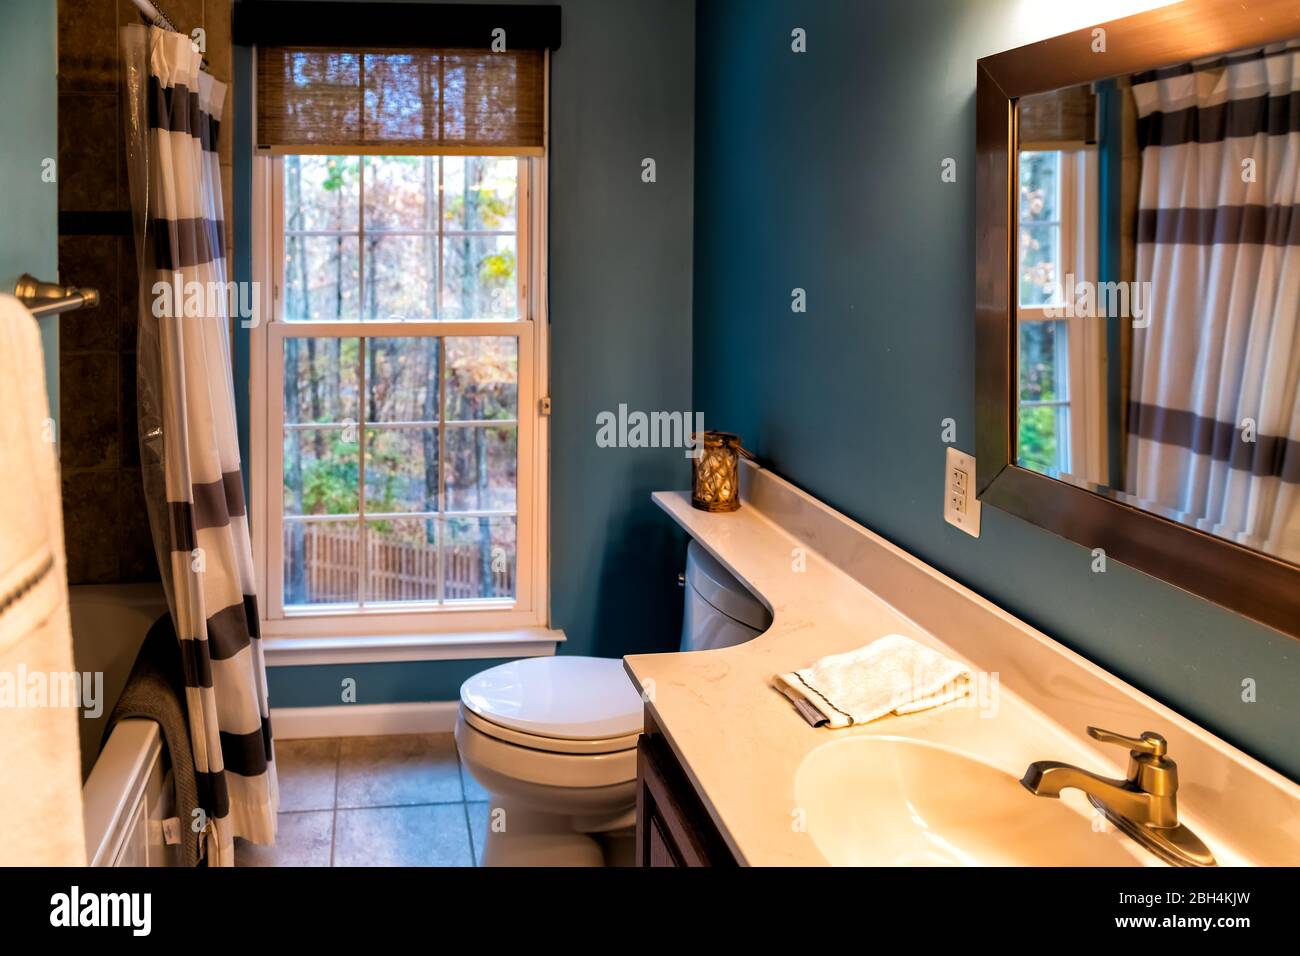 Modern dark clean bathroom in house, home with sink, toilet, counter and shower tub with window looking into backyard woods forest Stock Photo